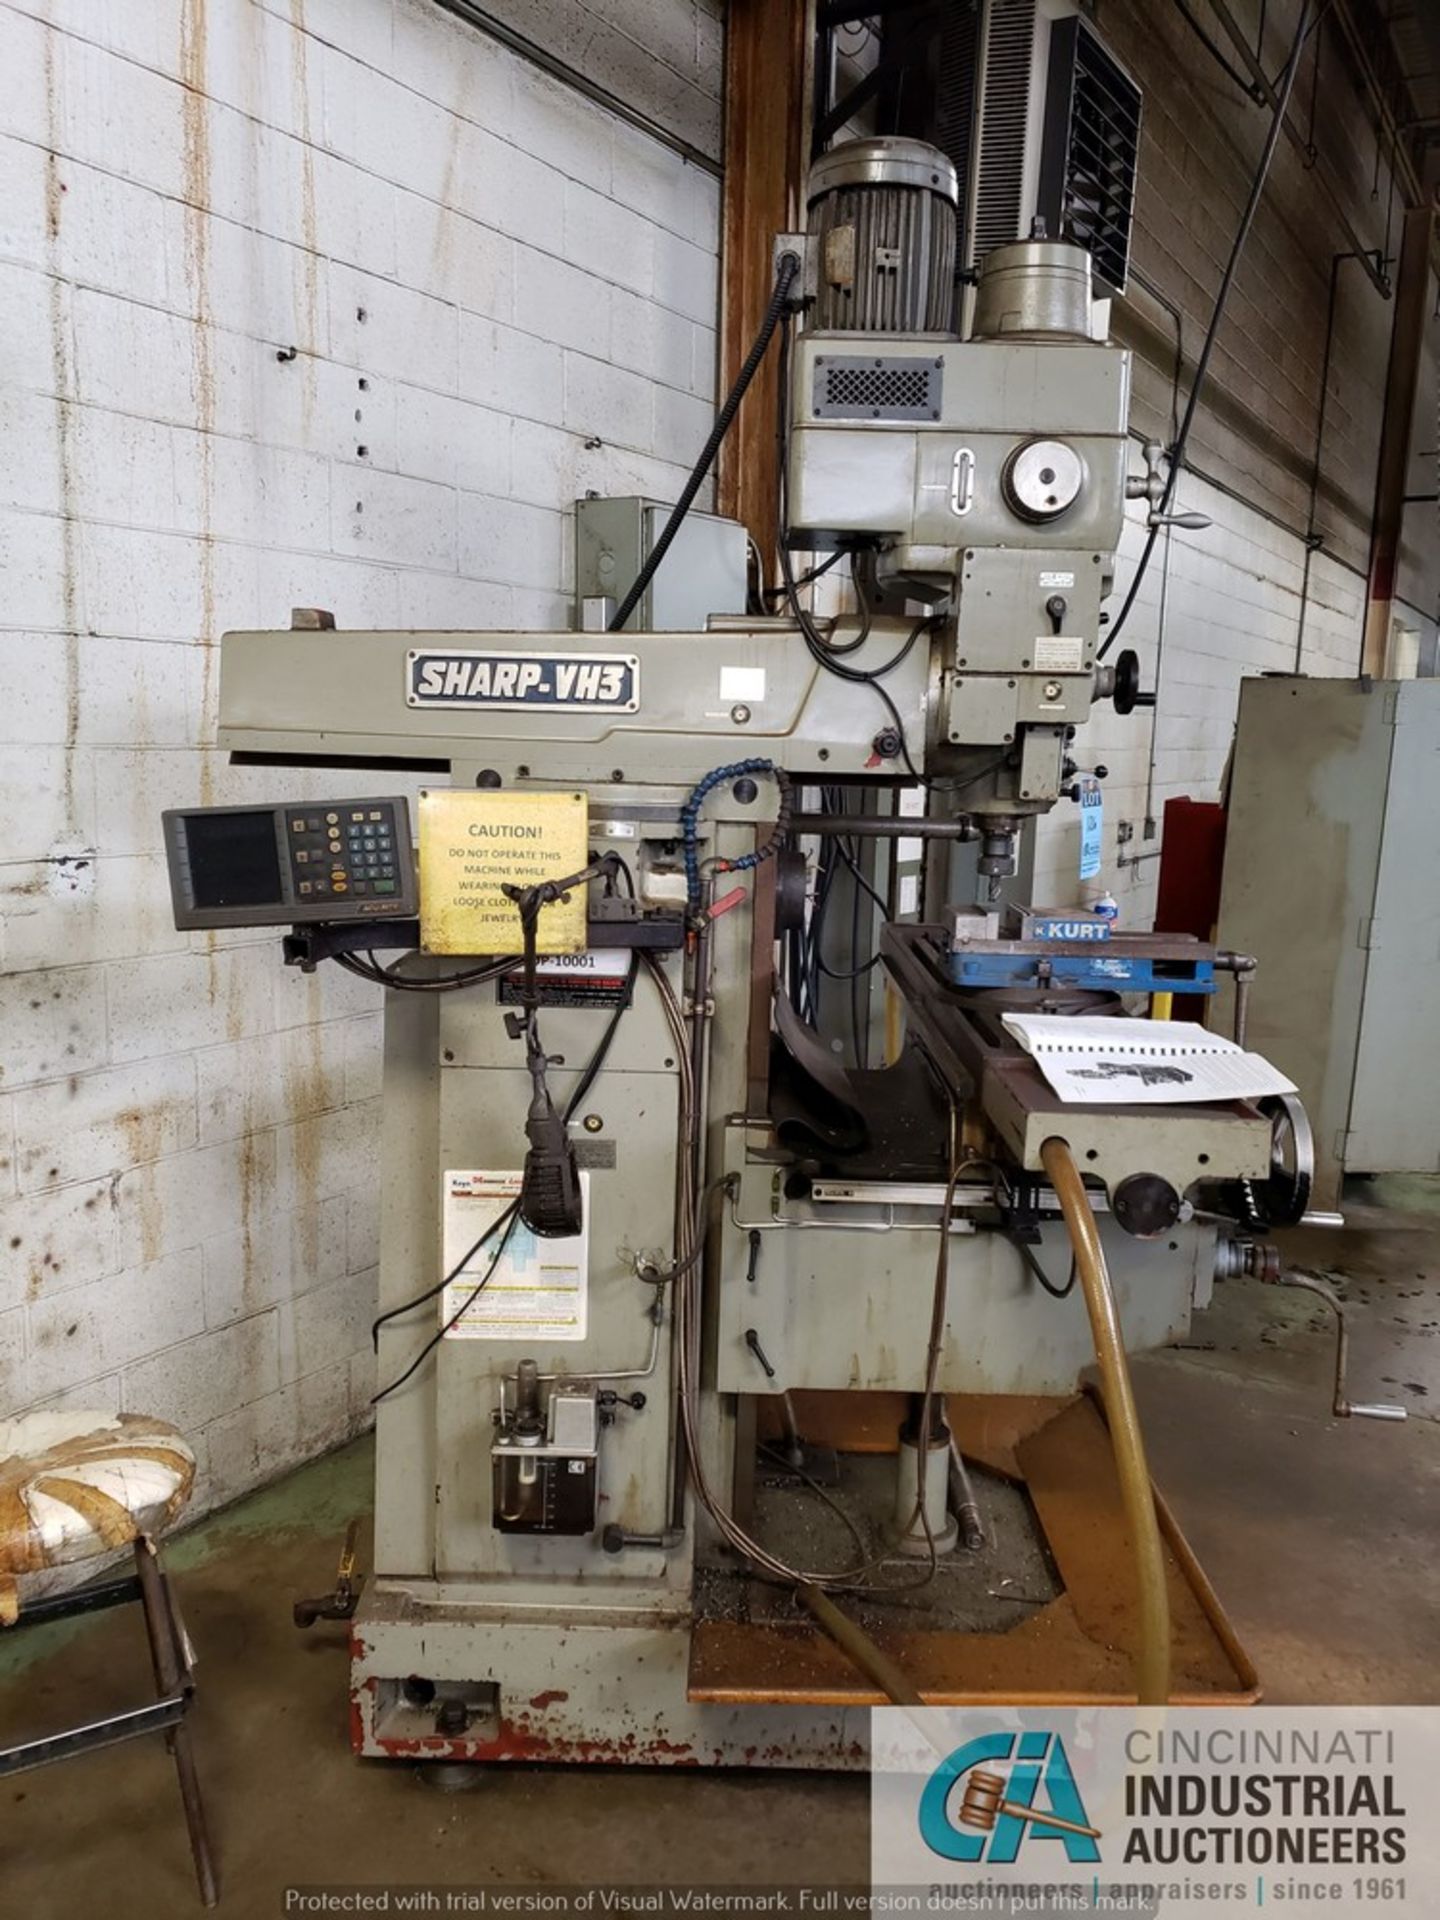 SHARPE MODEL VH3 VERTICAL MILLING MACHINE; S/N 2B399, 12" X 52" TABLE, SPINDLE SPEED 35-1,700 RPM, - Image 8 of 10